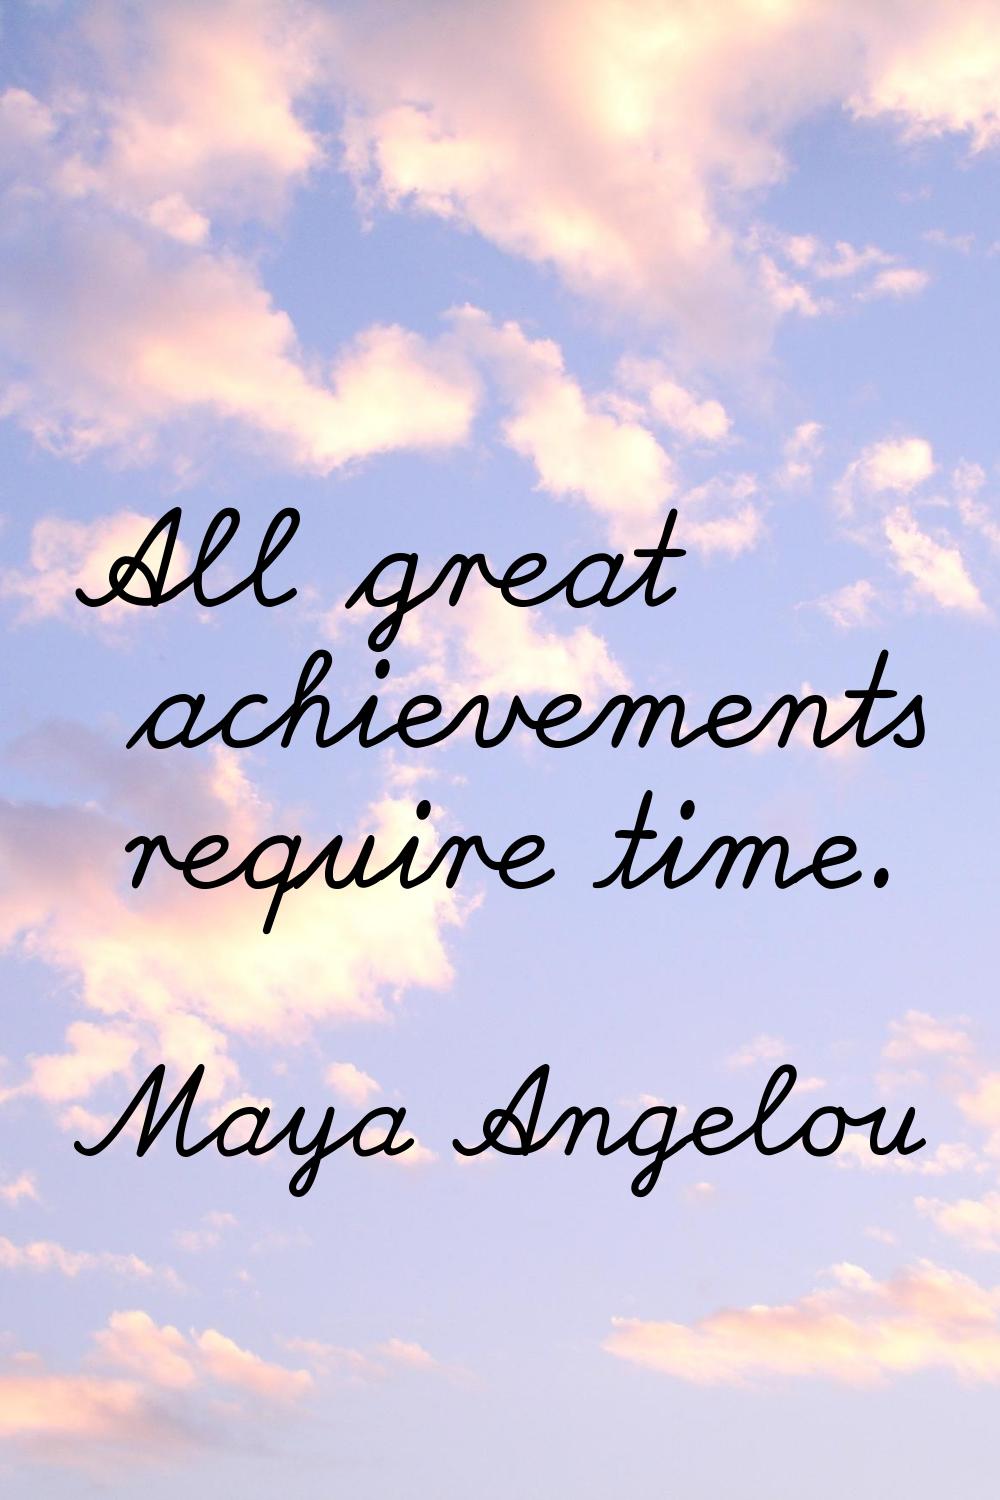 All great achievements require time.